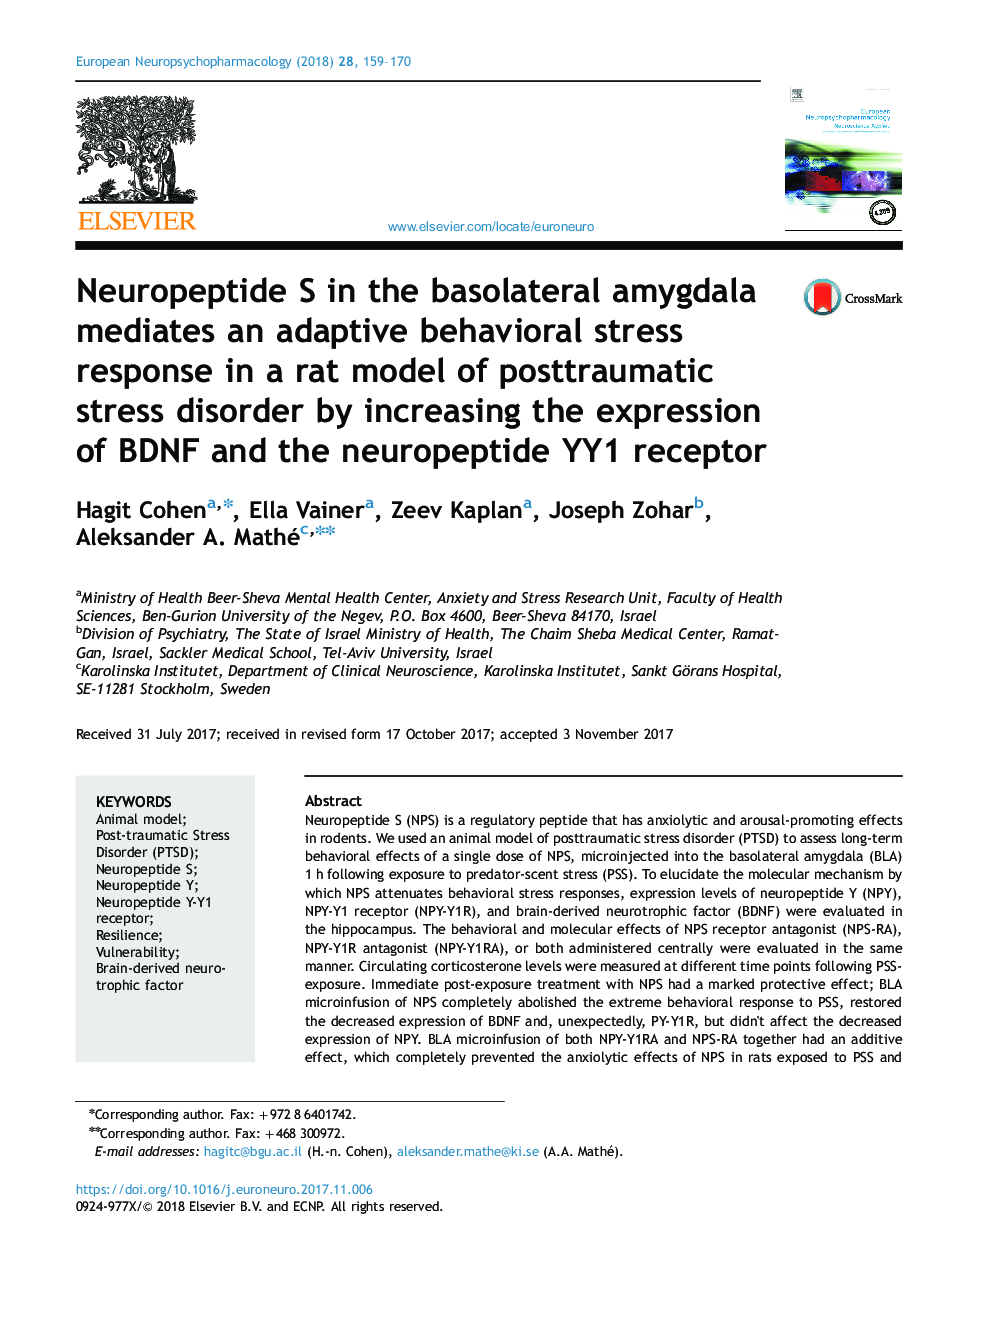 Neuropeptide S in the basolateral amygdala mediates an adaptive behavioral stress response in a rat model of posttraumatic stress disorder by increasing the expression of BDNF and the neuropeptide YY1 receptor